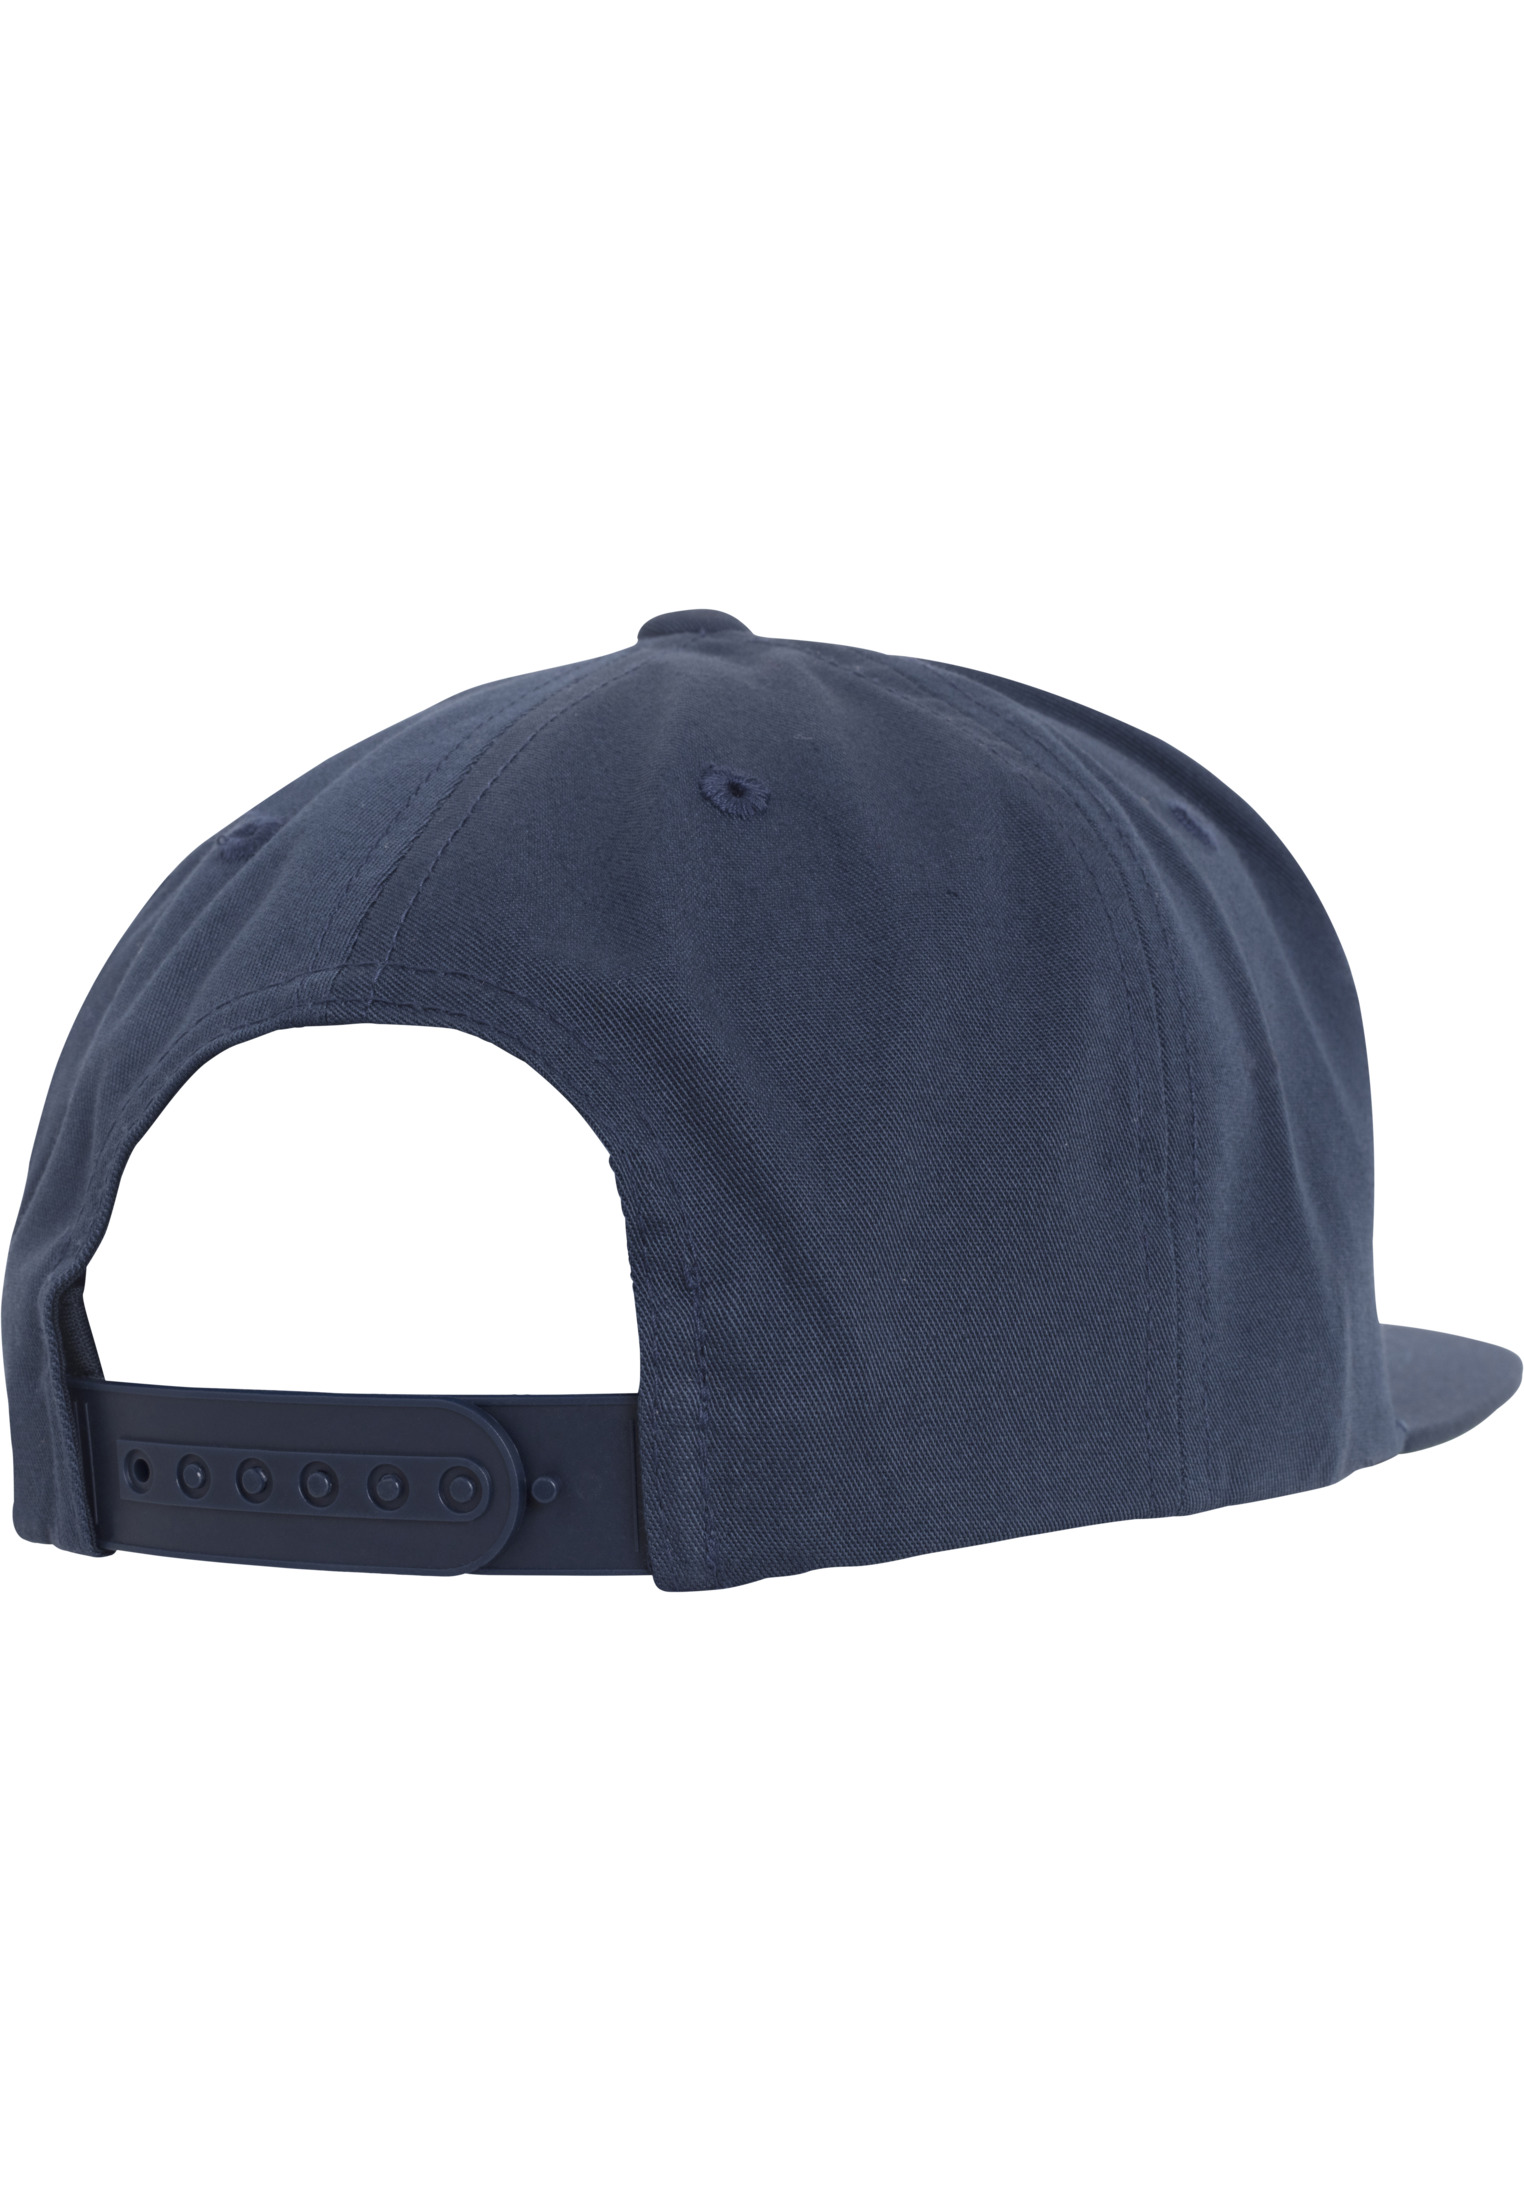 Kids Pro-Style Twill Snapback Youth Cap in Farbe navy